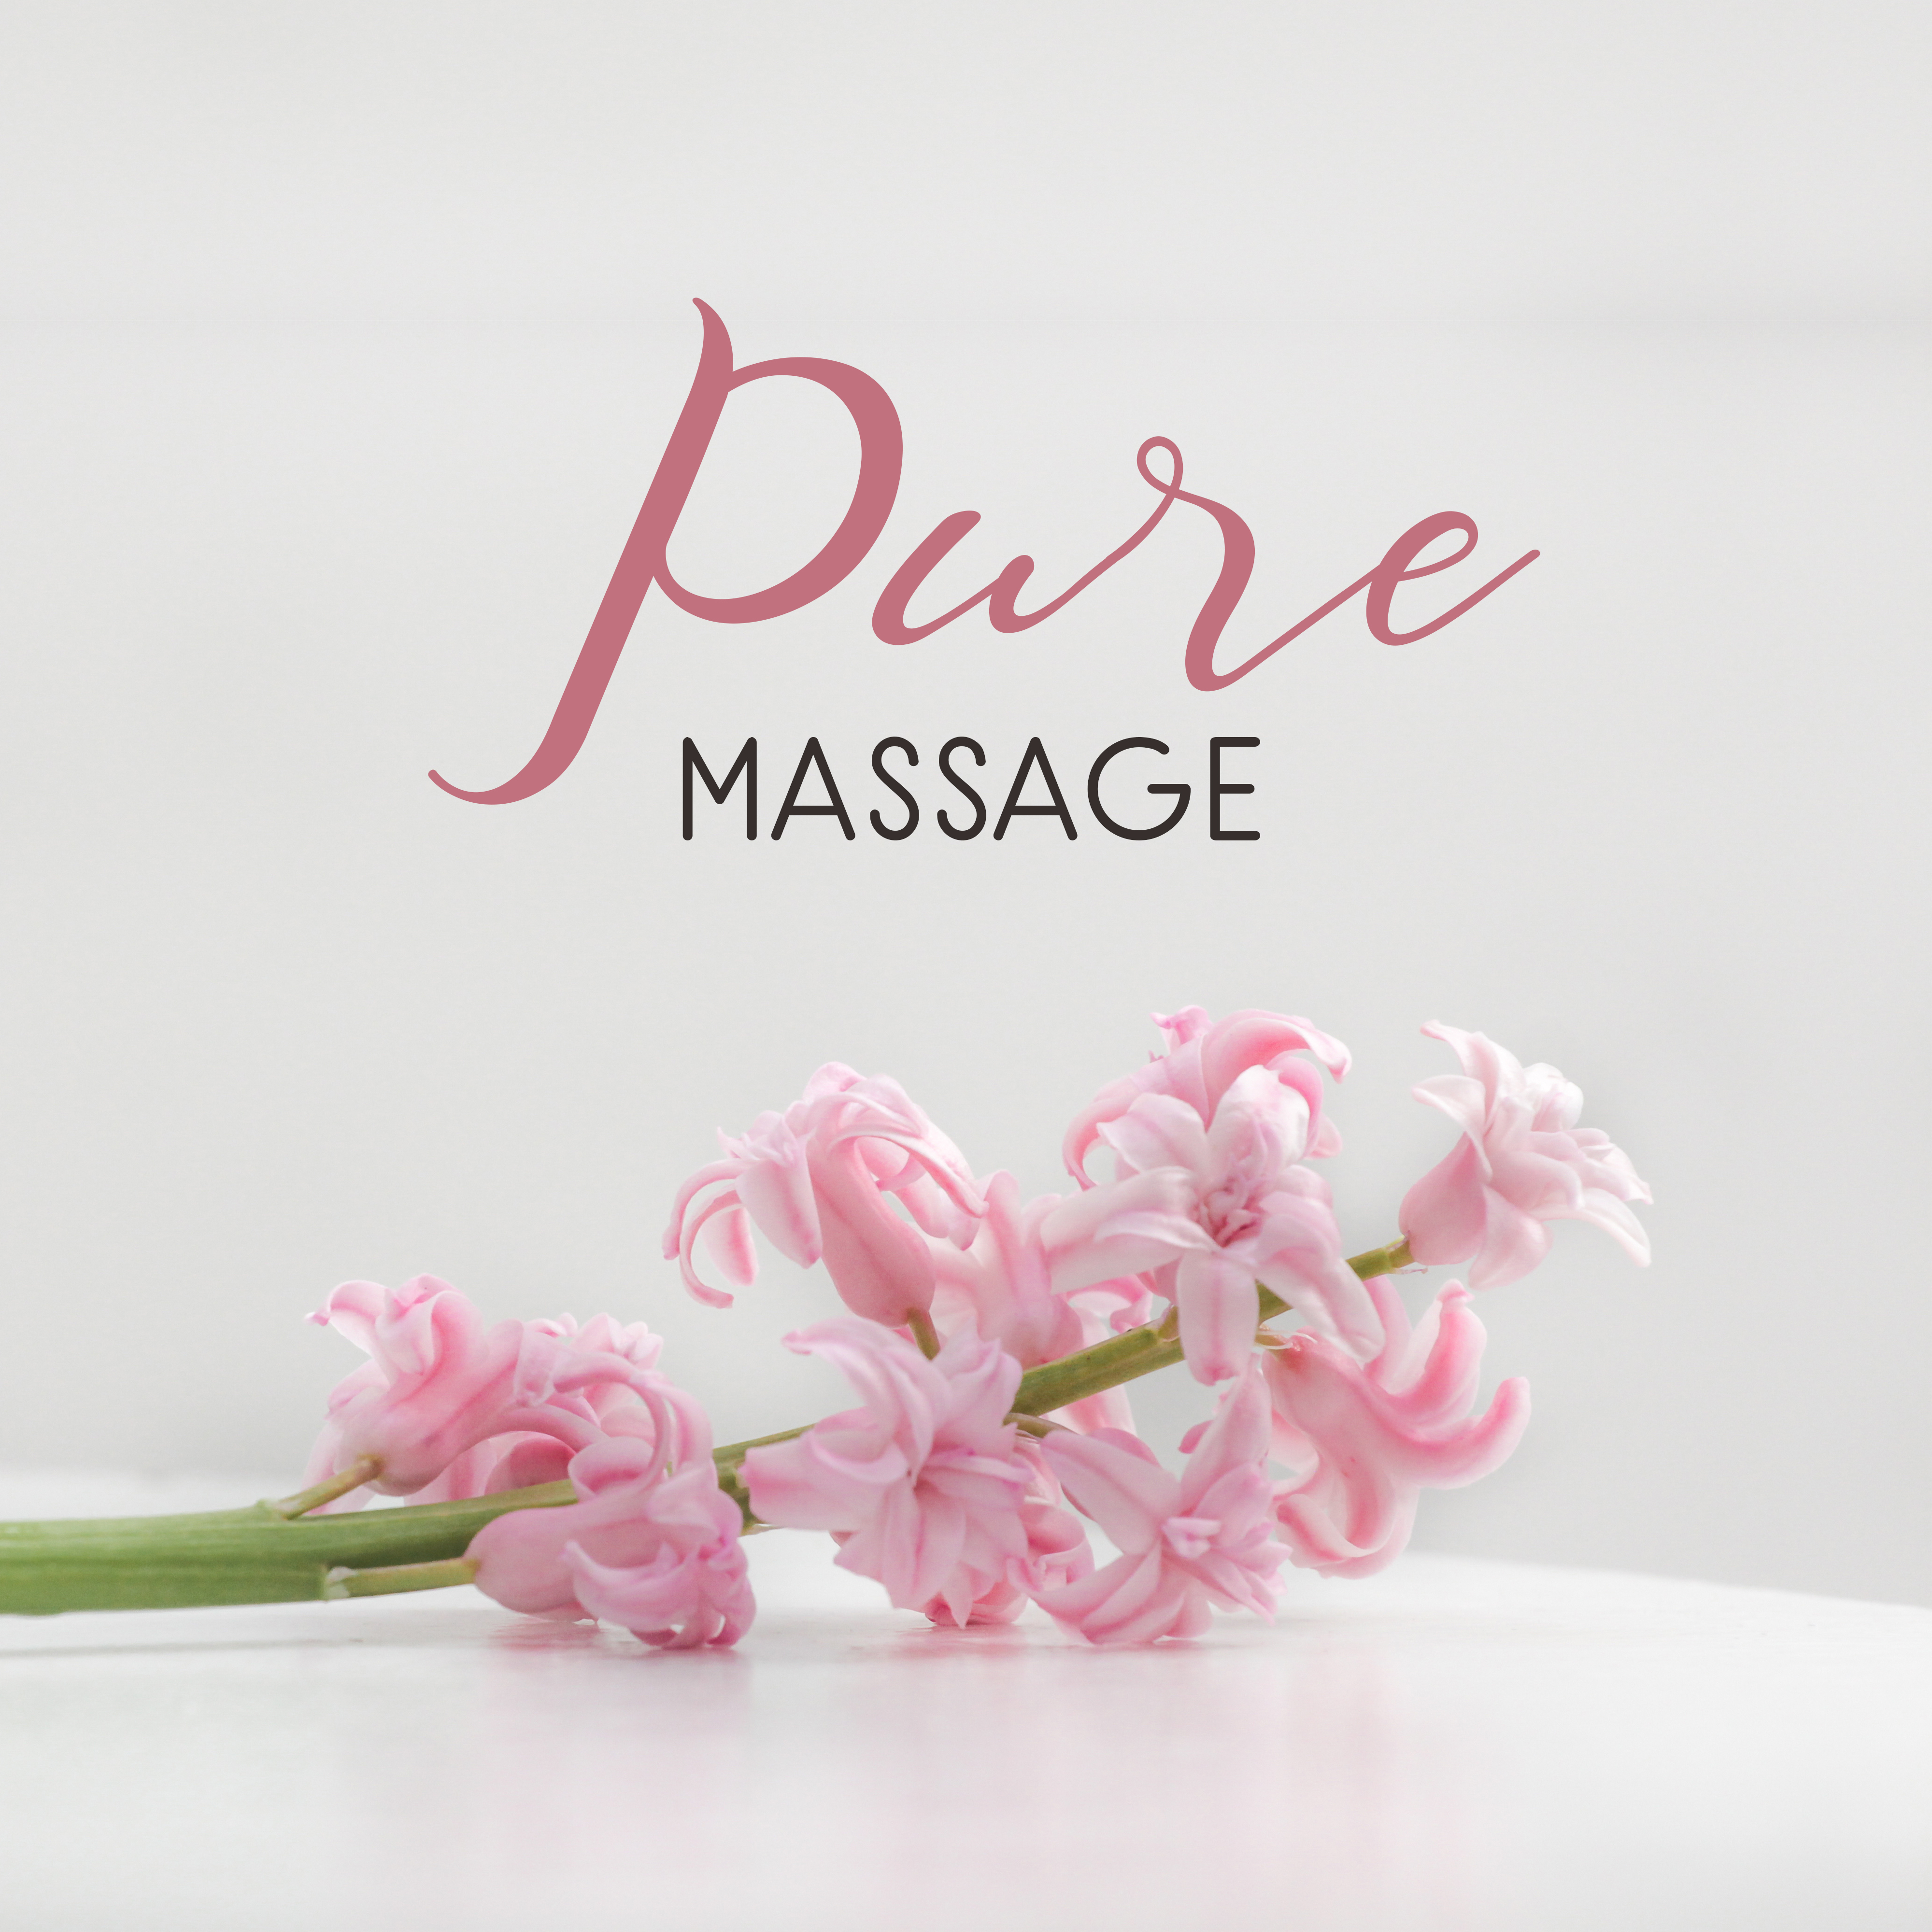 Pure Massage  Oriental Melodies for Wellness, Spa Music, Tibetan Sounds, Gentle Guitar, Soothing Piano, Nature Sounds for Relaxation